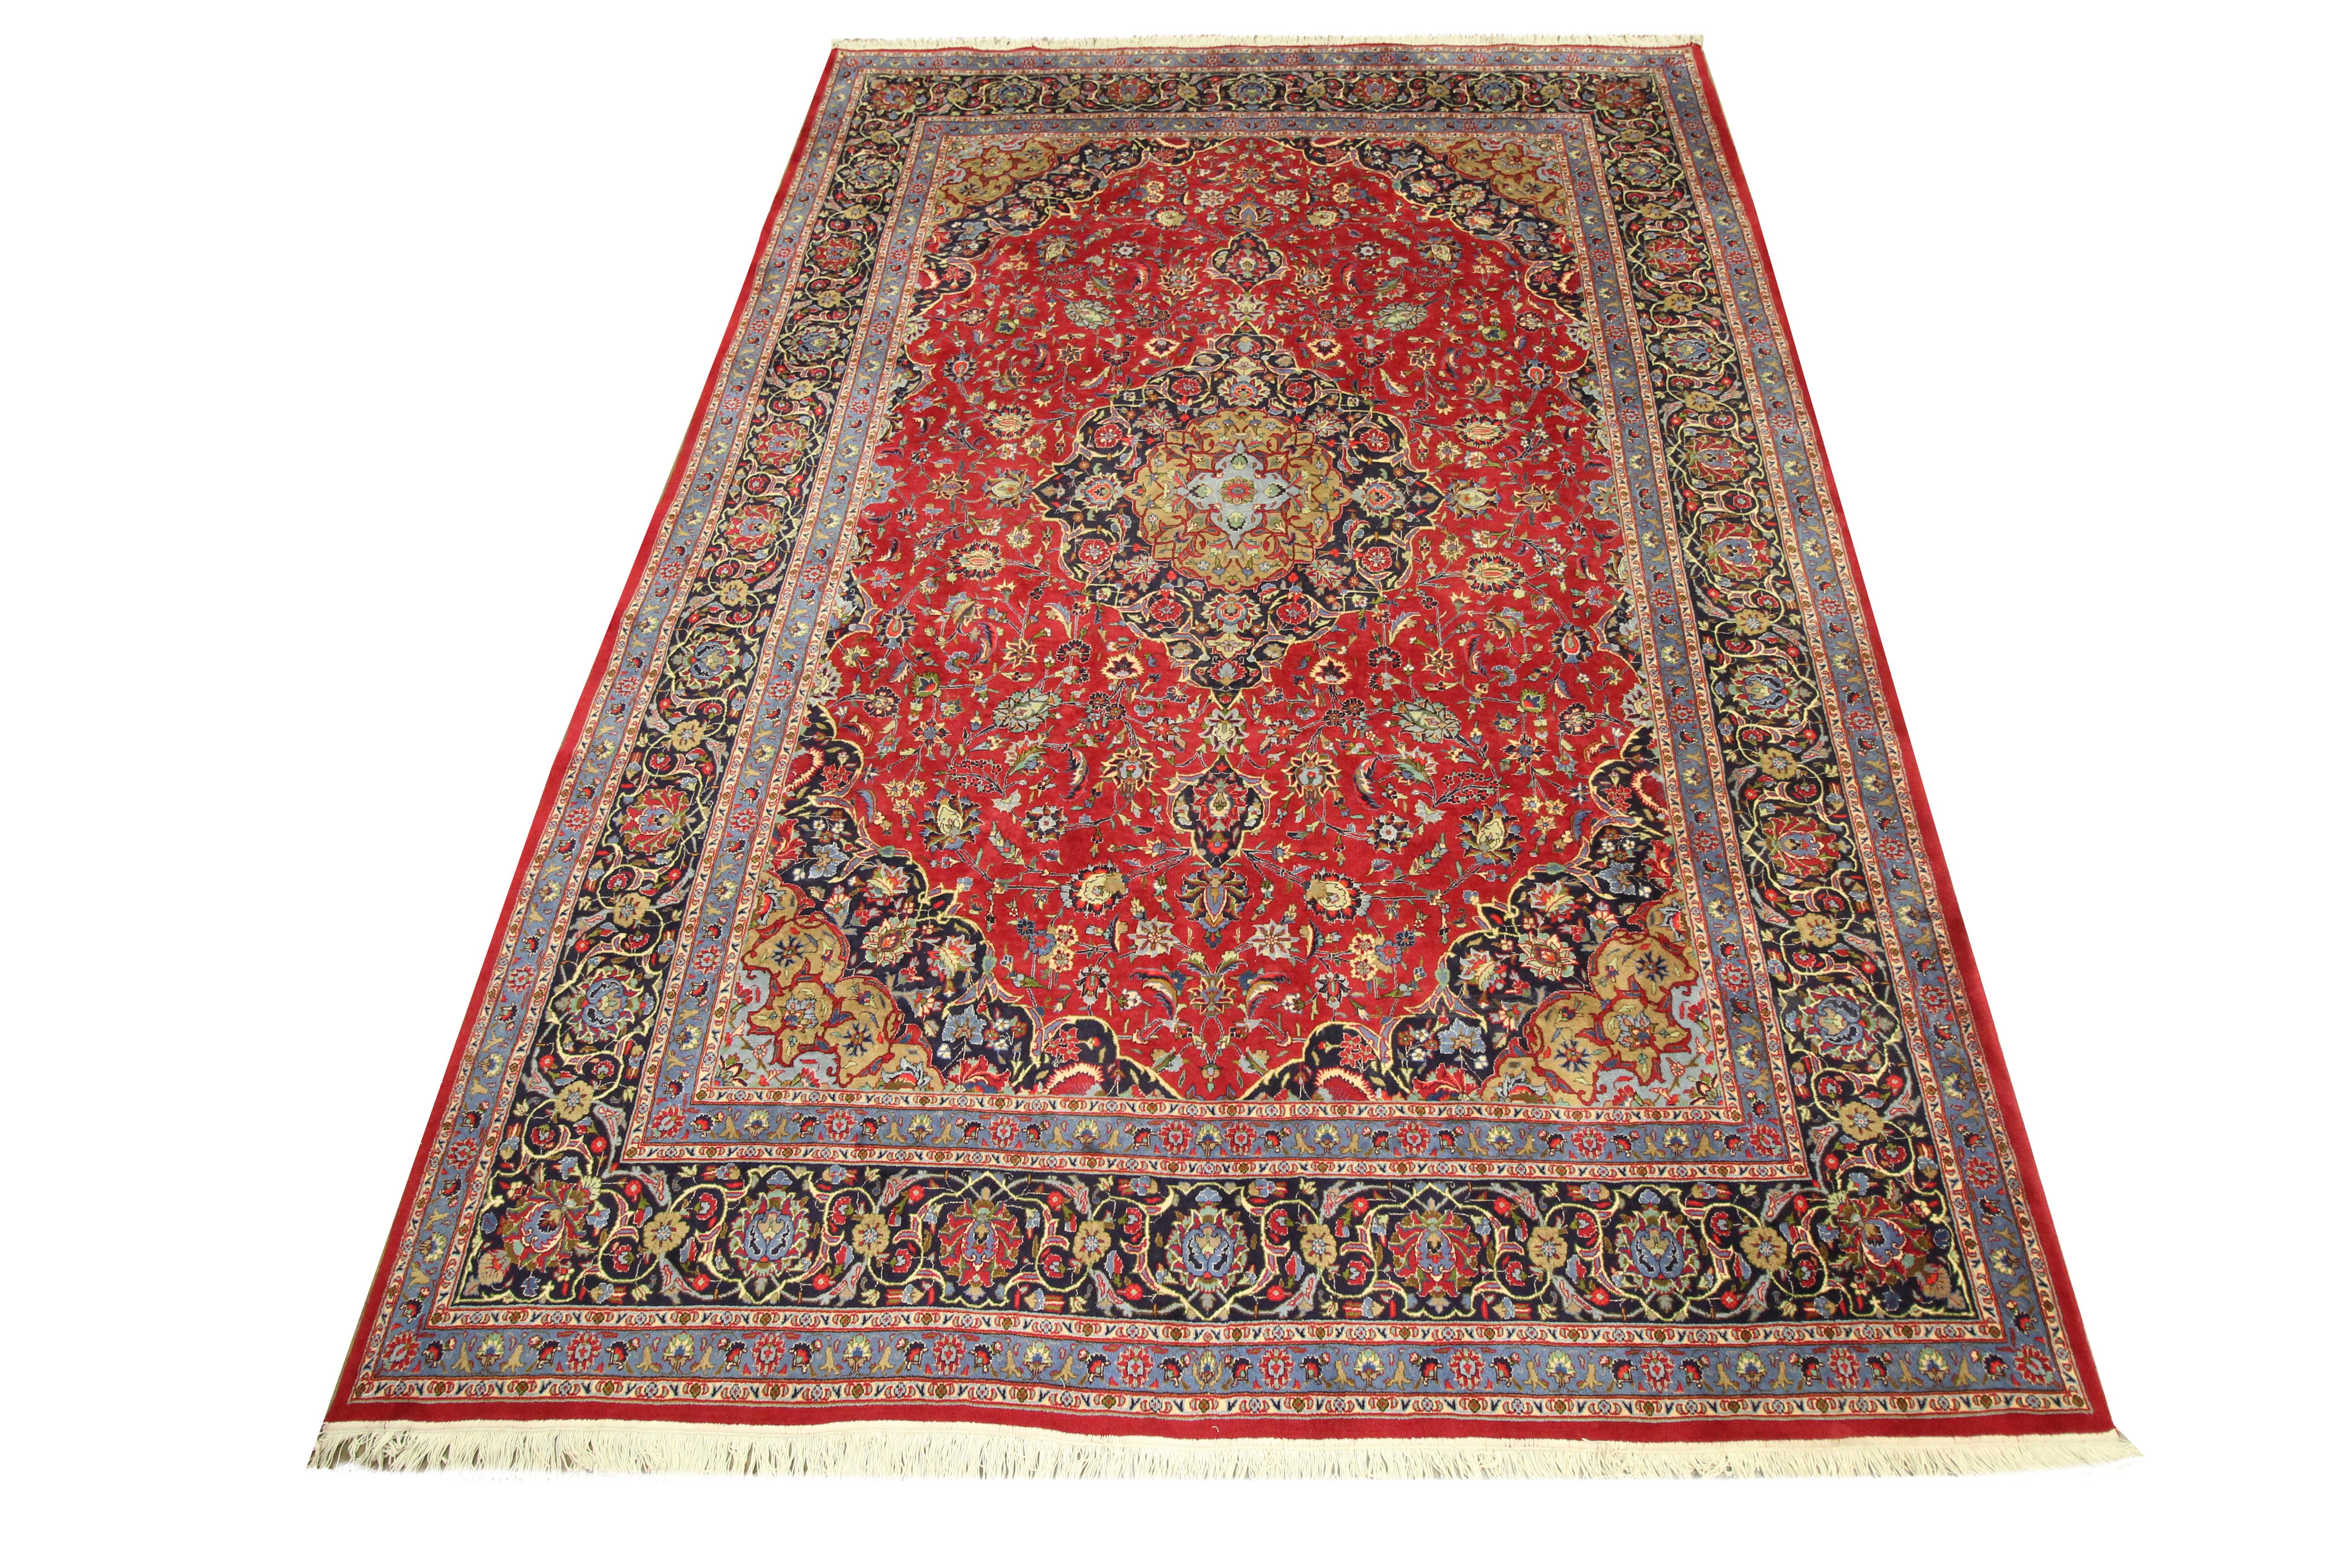 This beautifully handwoven oriental area rug is a traditional carpet woven in the mid 20th century, circa 1950. The central design has been woven on a rich red background and features an intricate medallion design that has been framed with a